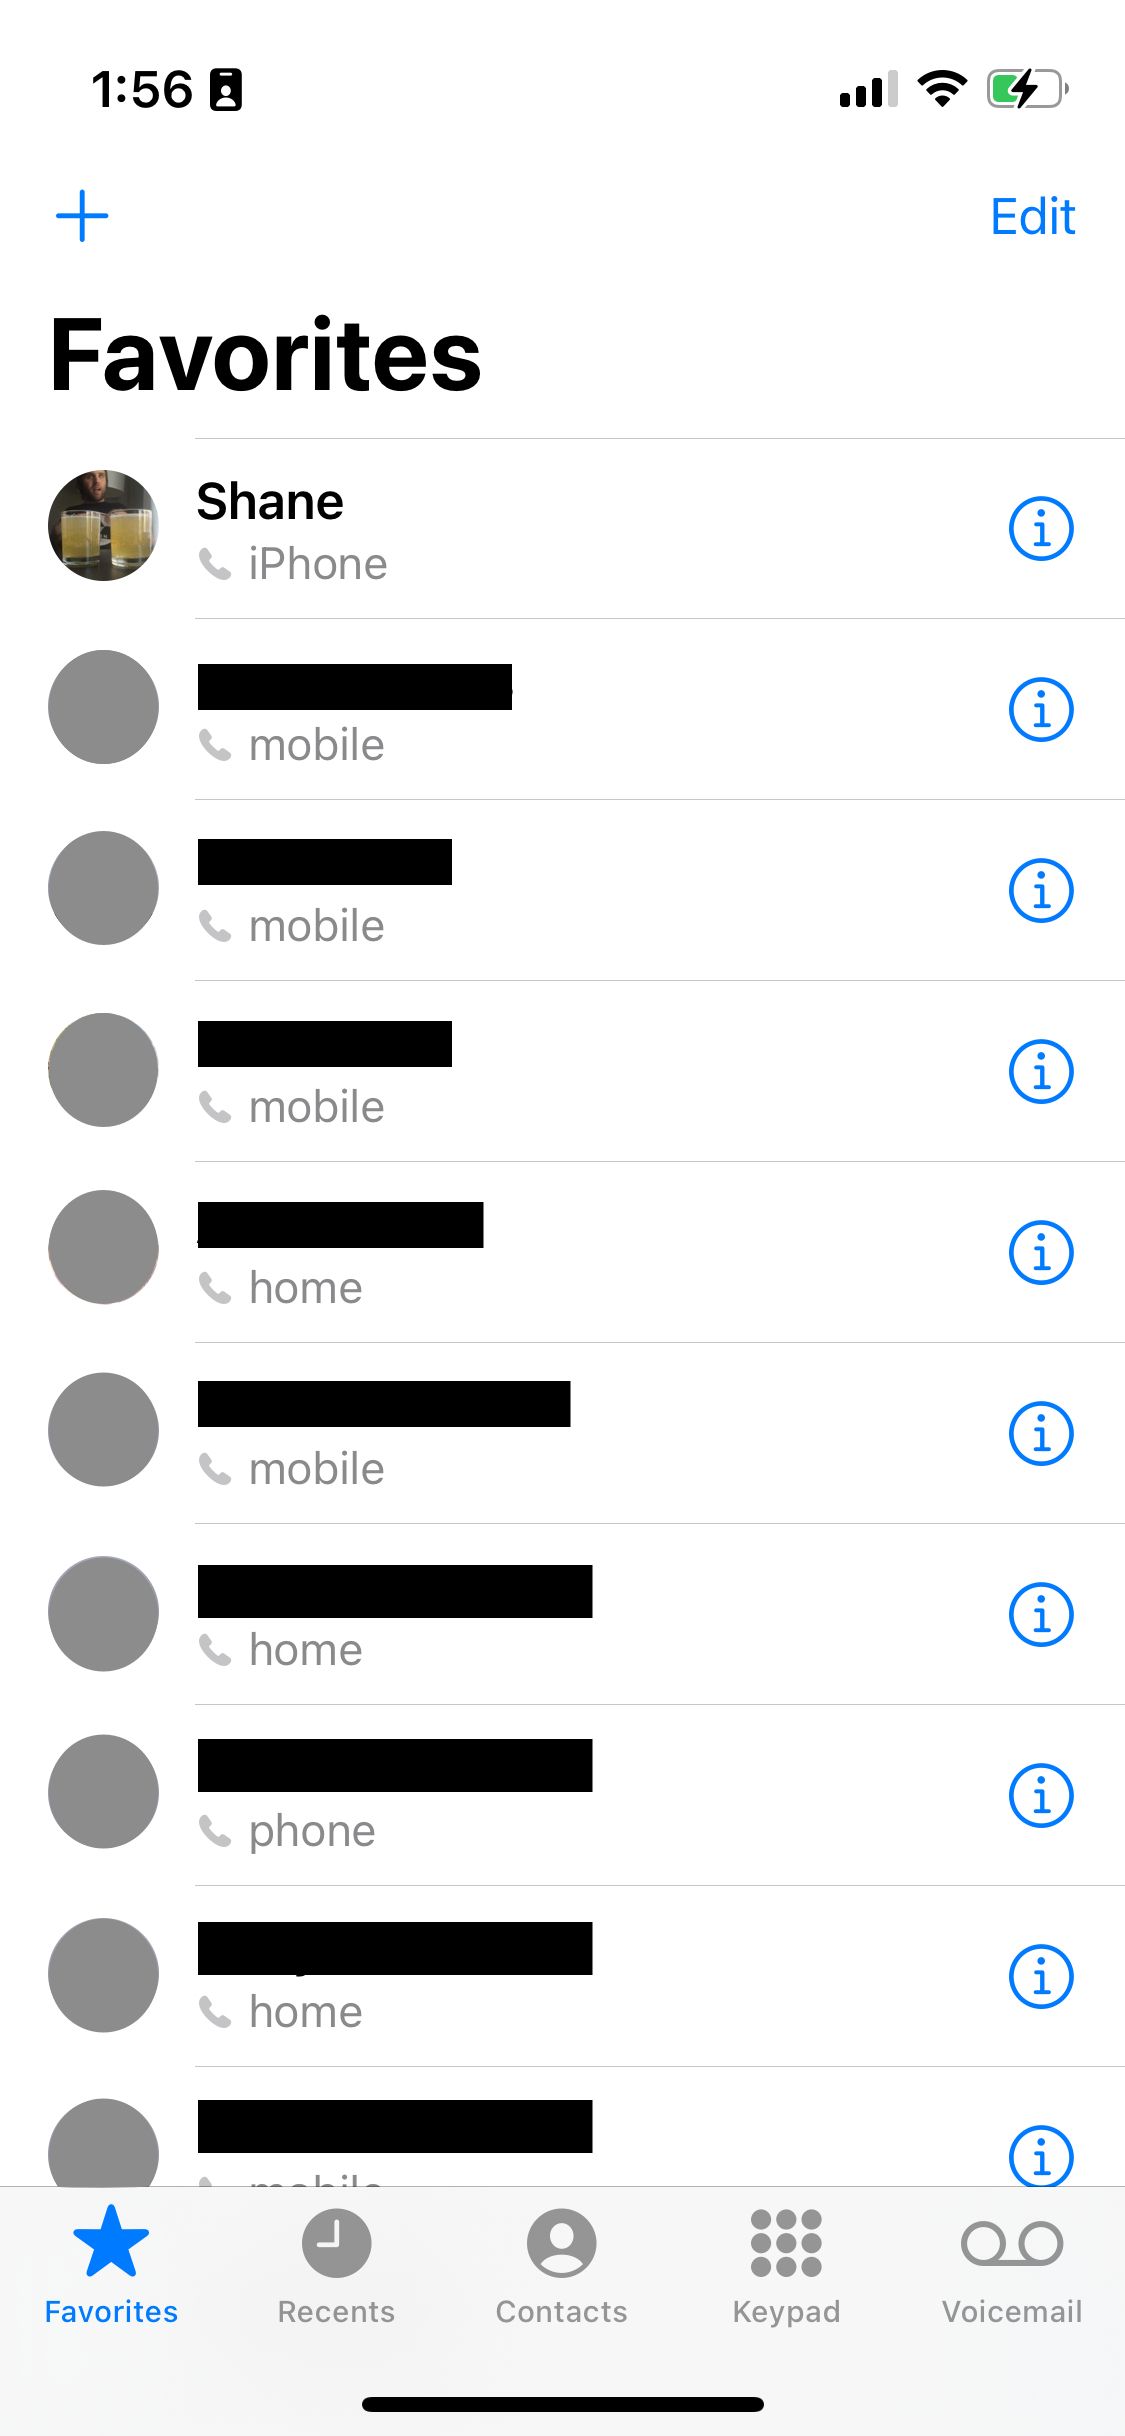 Screenshot of a contacts list in a smartphone